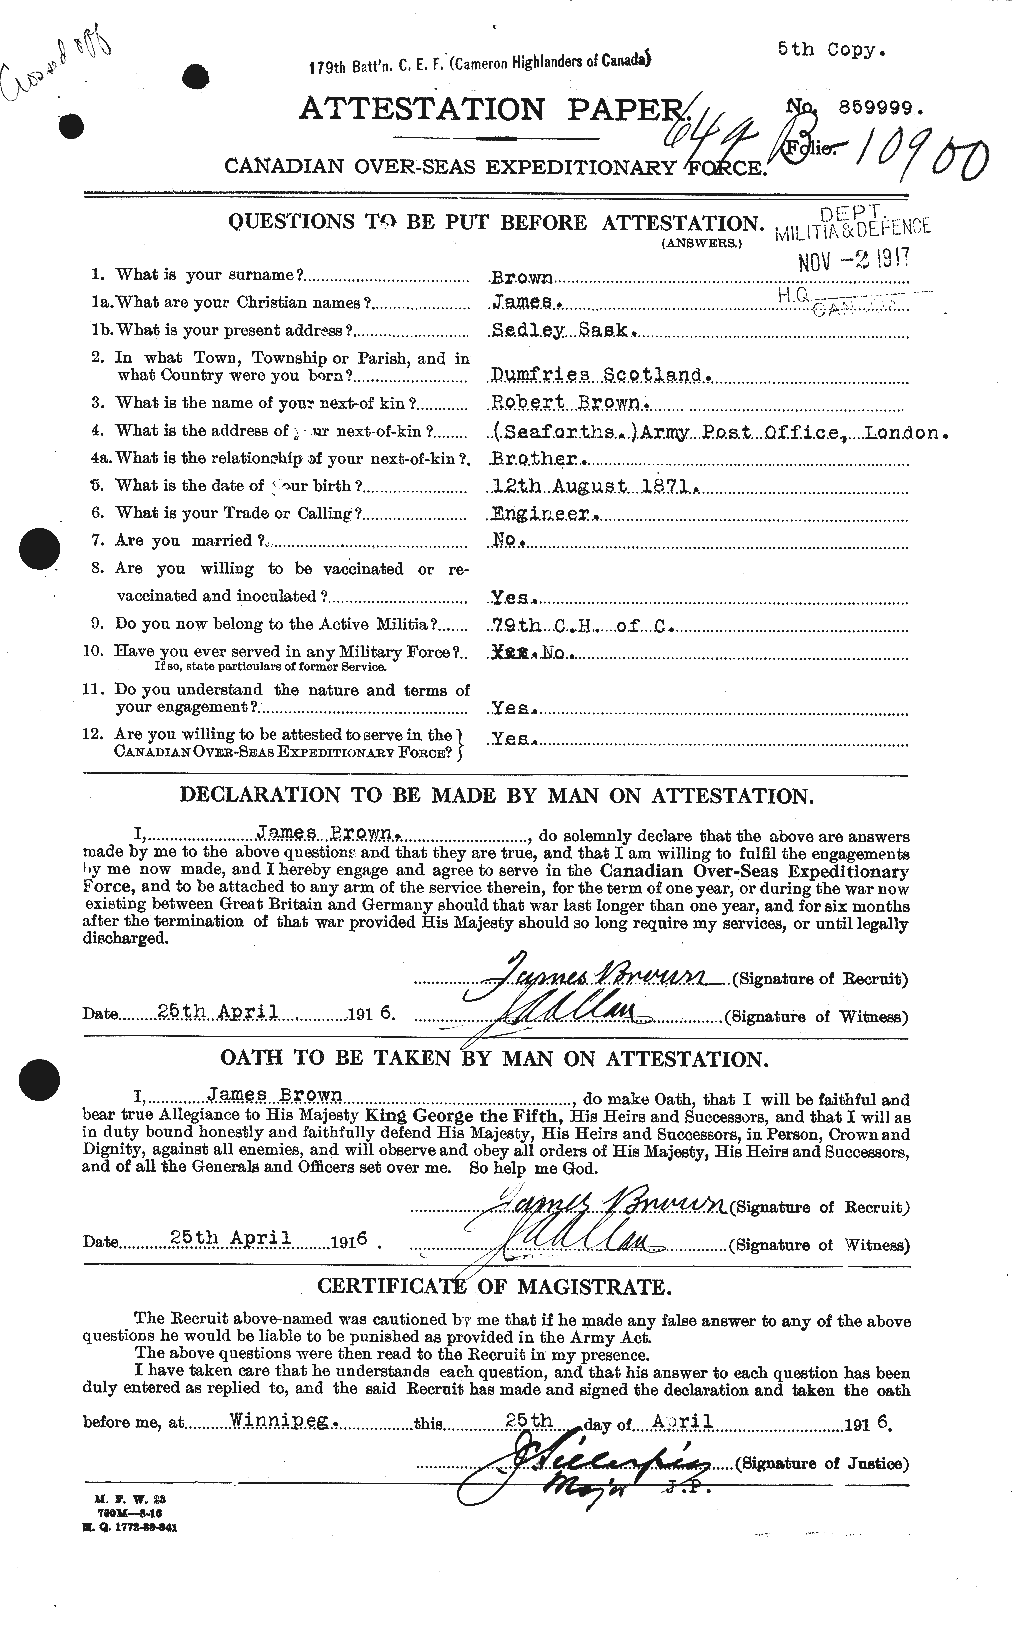 Personnel Records of the First World War - CEF 265749a